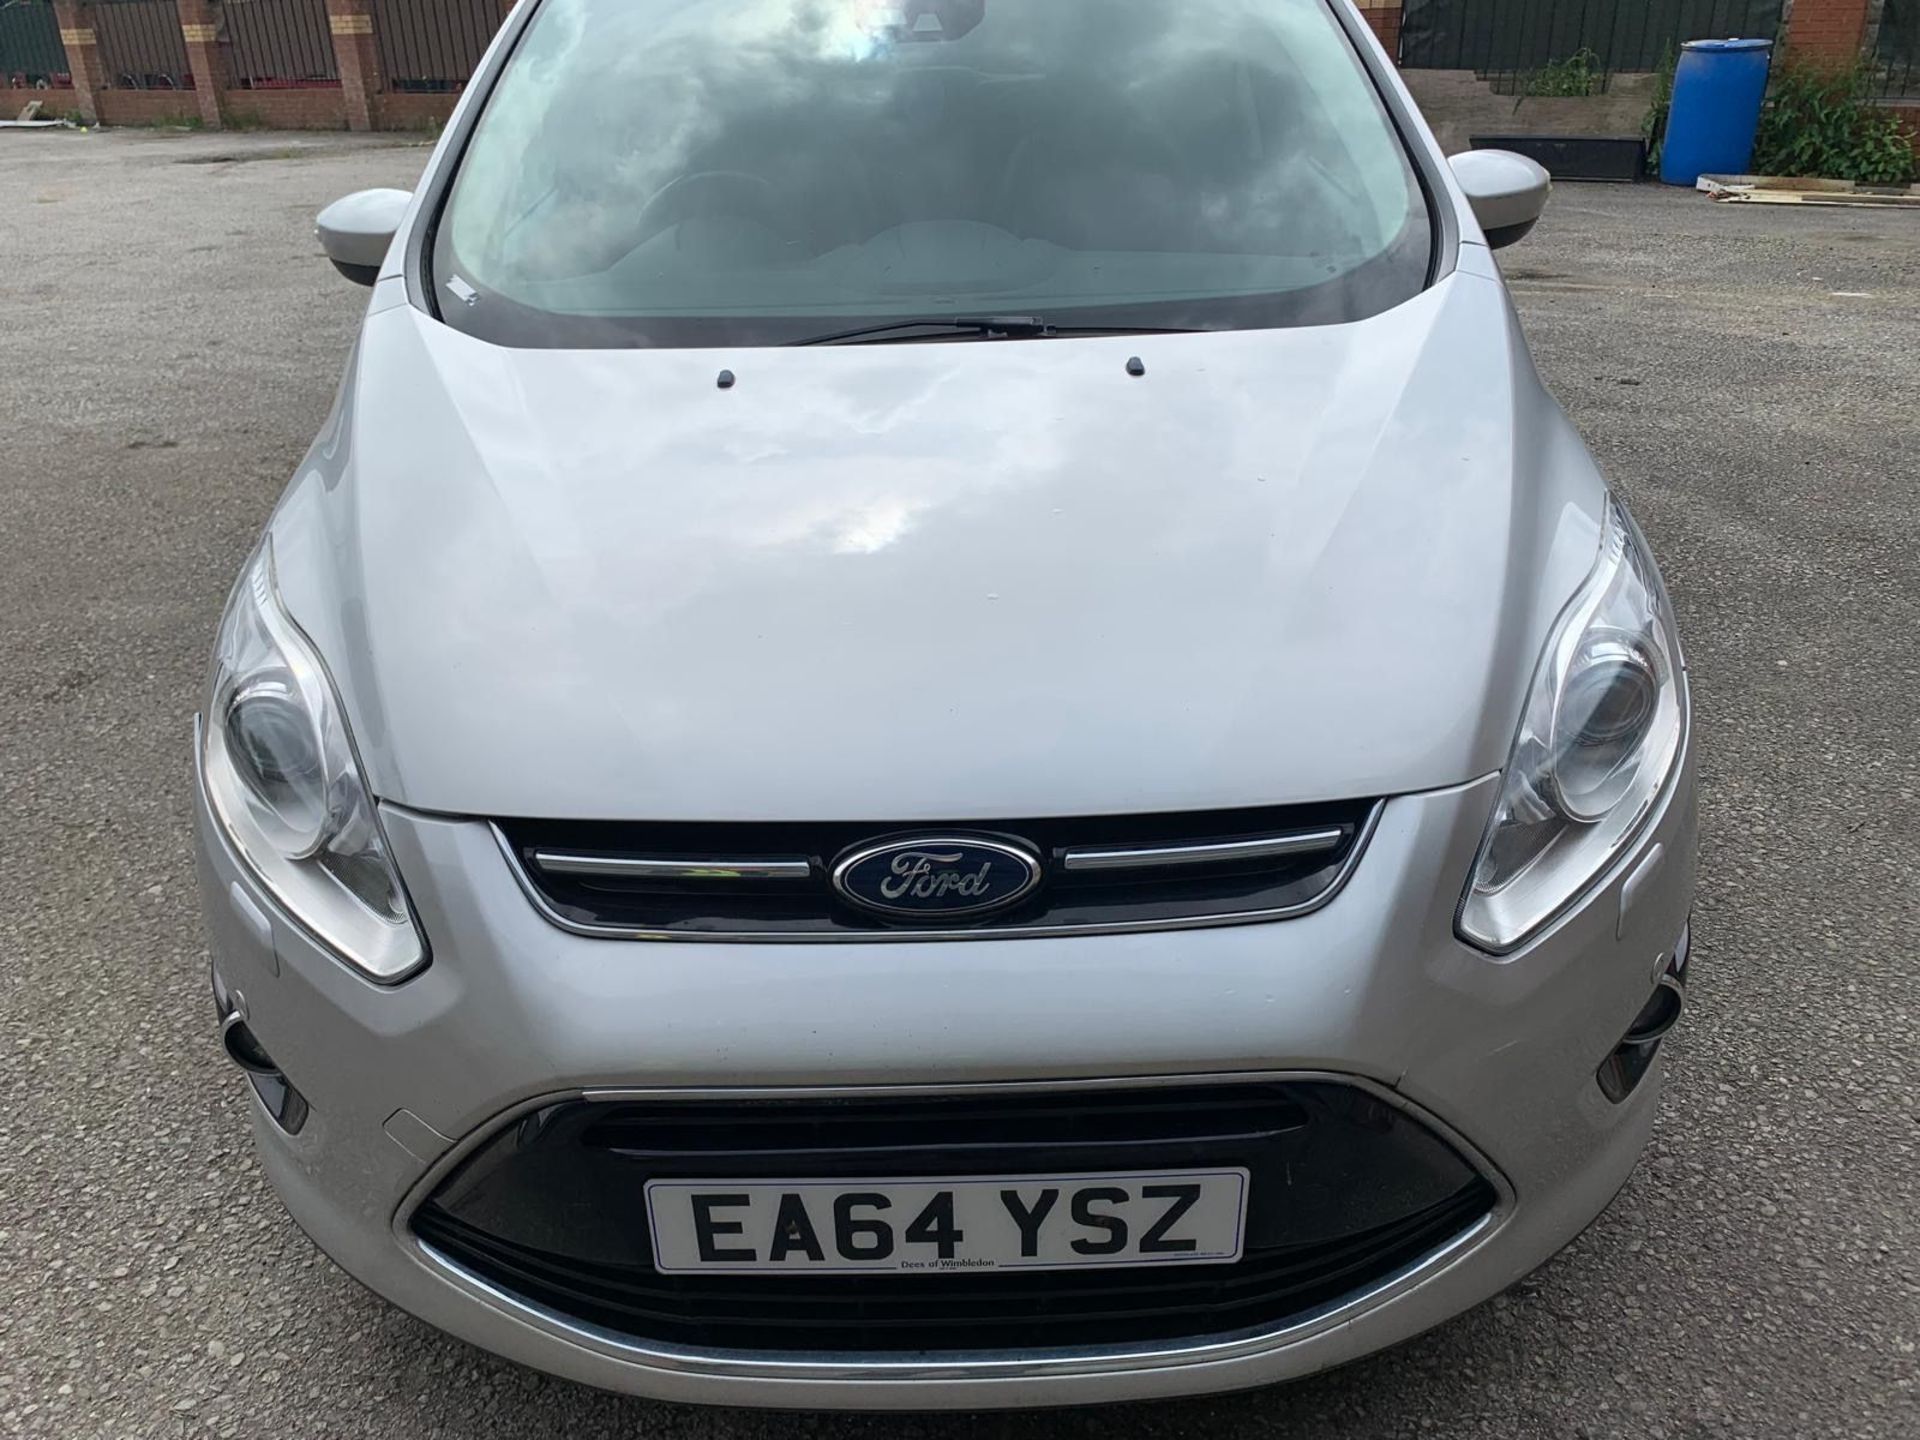 EA64 YSZ FORD GRAND C-MAX Silver Diesel First Registration: 12.11.14 Mot: 09.08.24 Mileage: 150, - Image 2 of 12